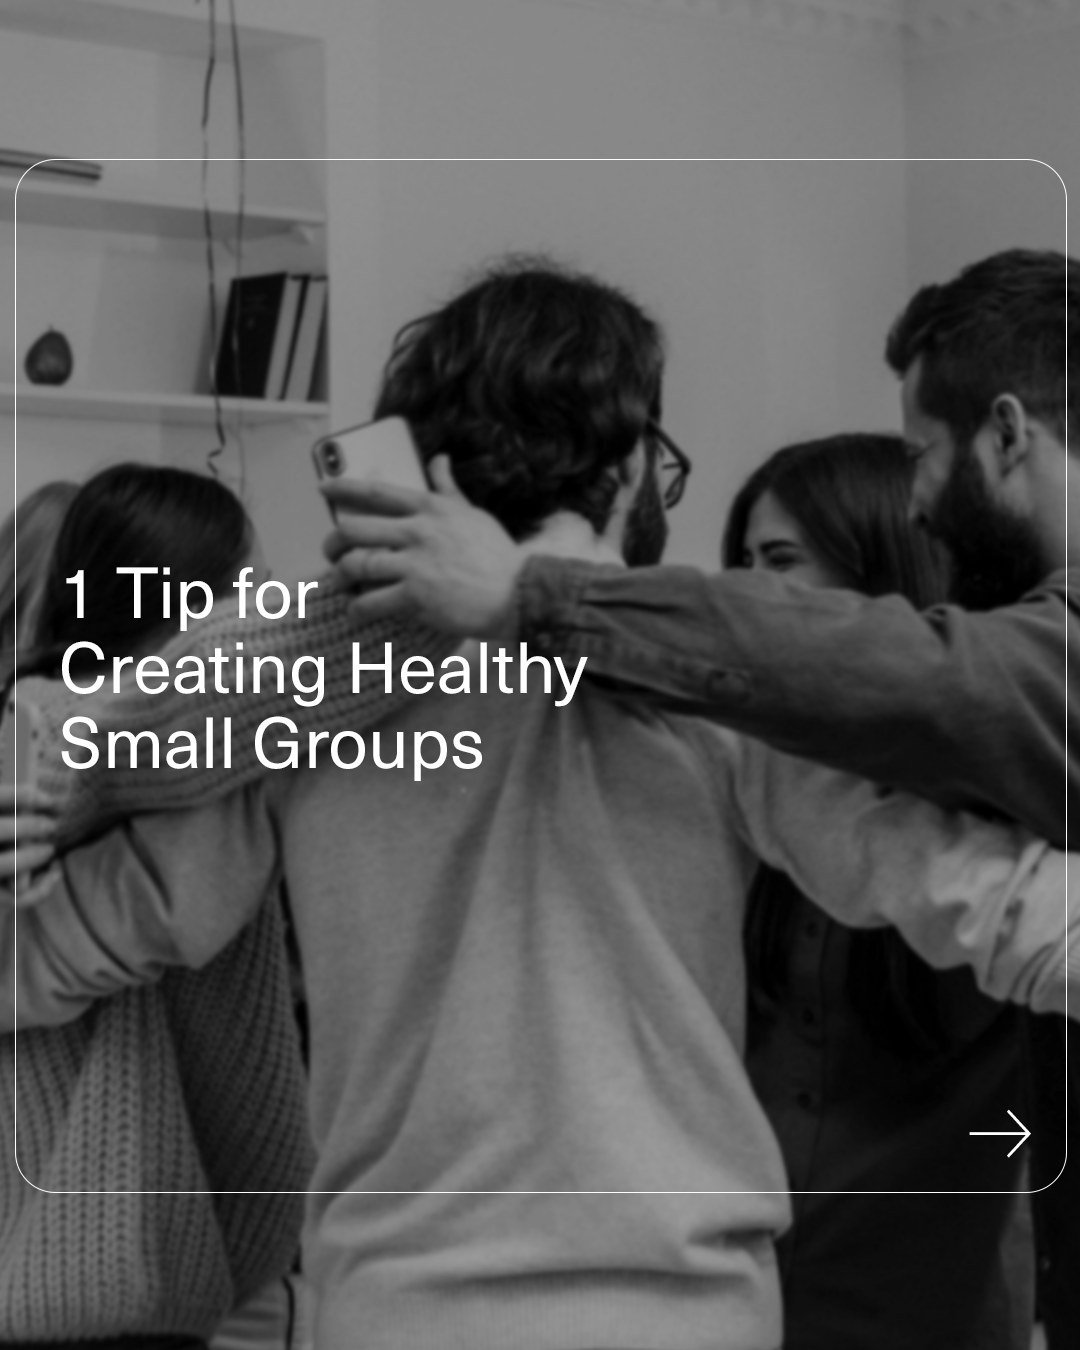 Have you been part of a good small group? What did you do? Let us know in the comments.
ㅤ
#christiancommunity #christians #discipleship